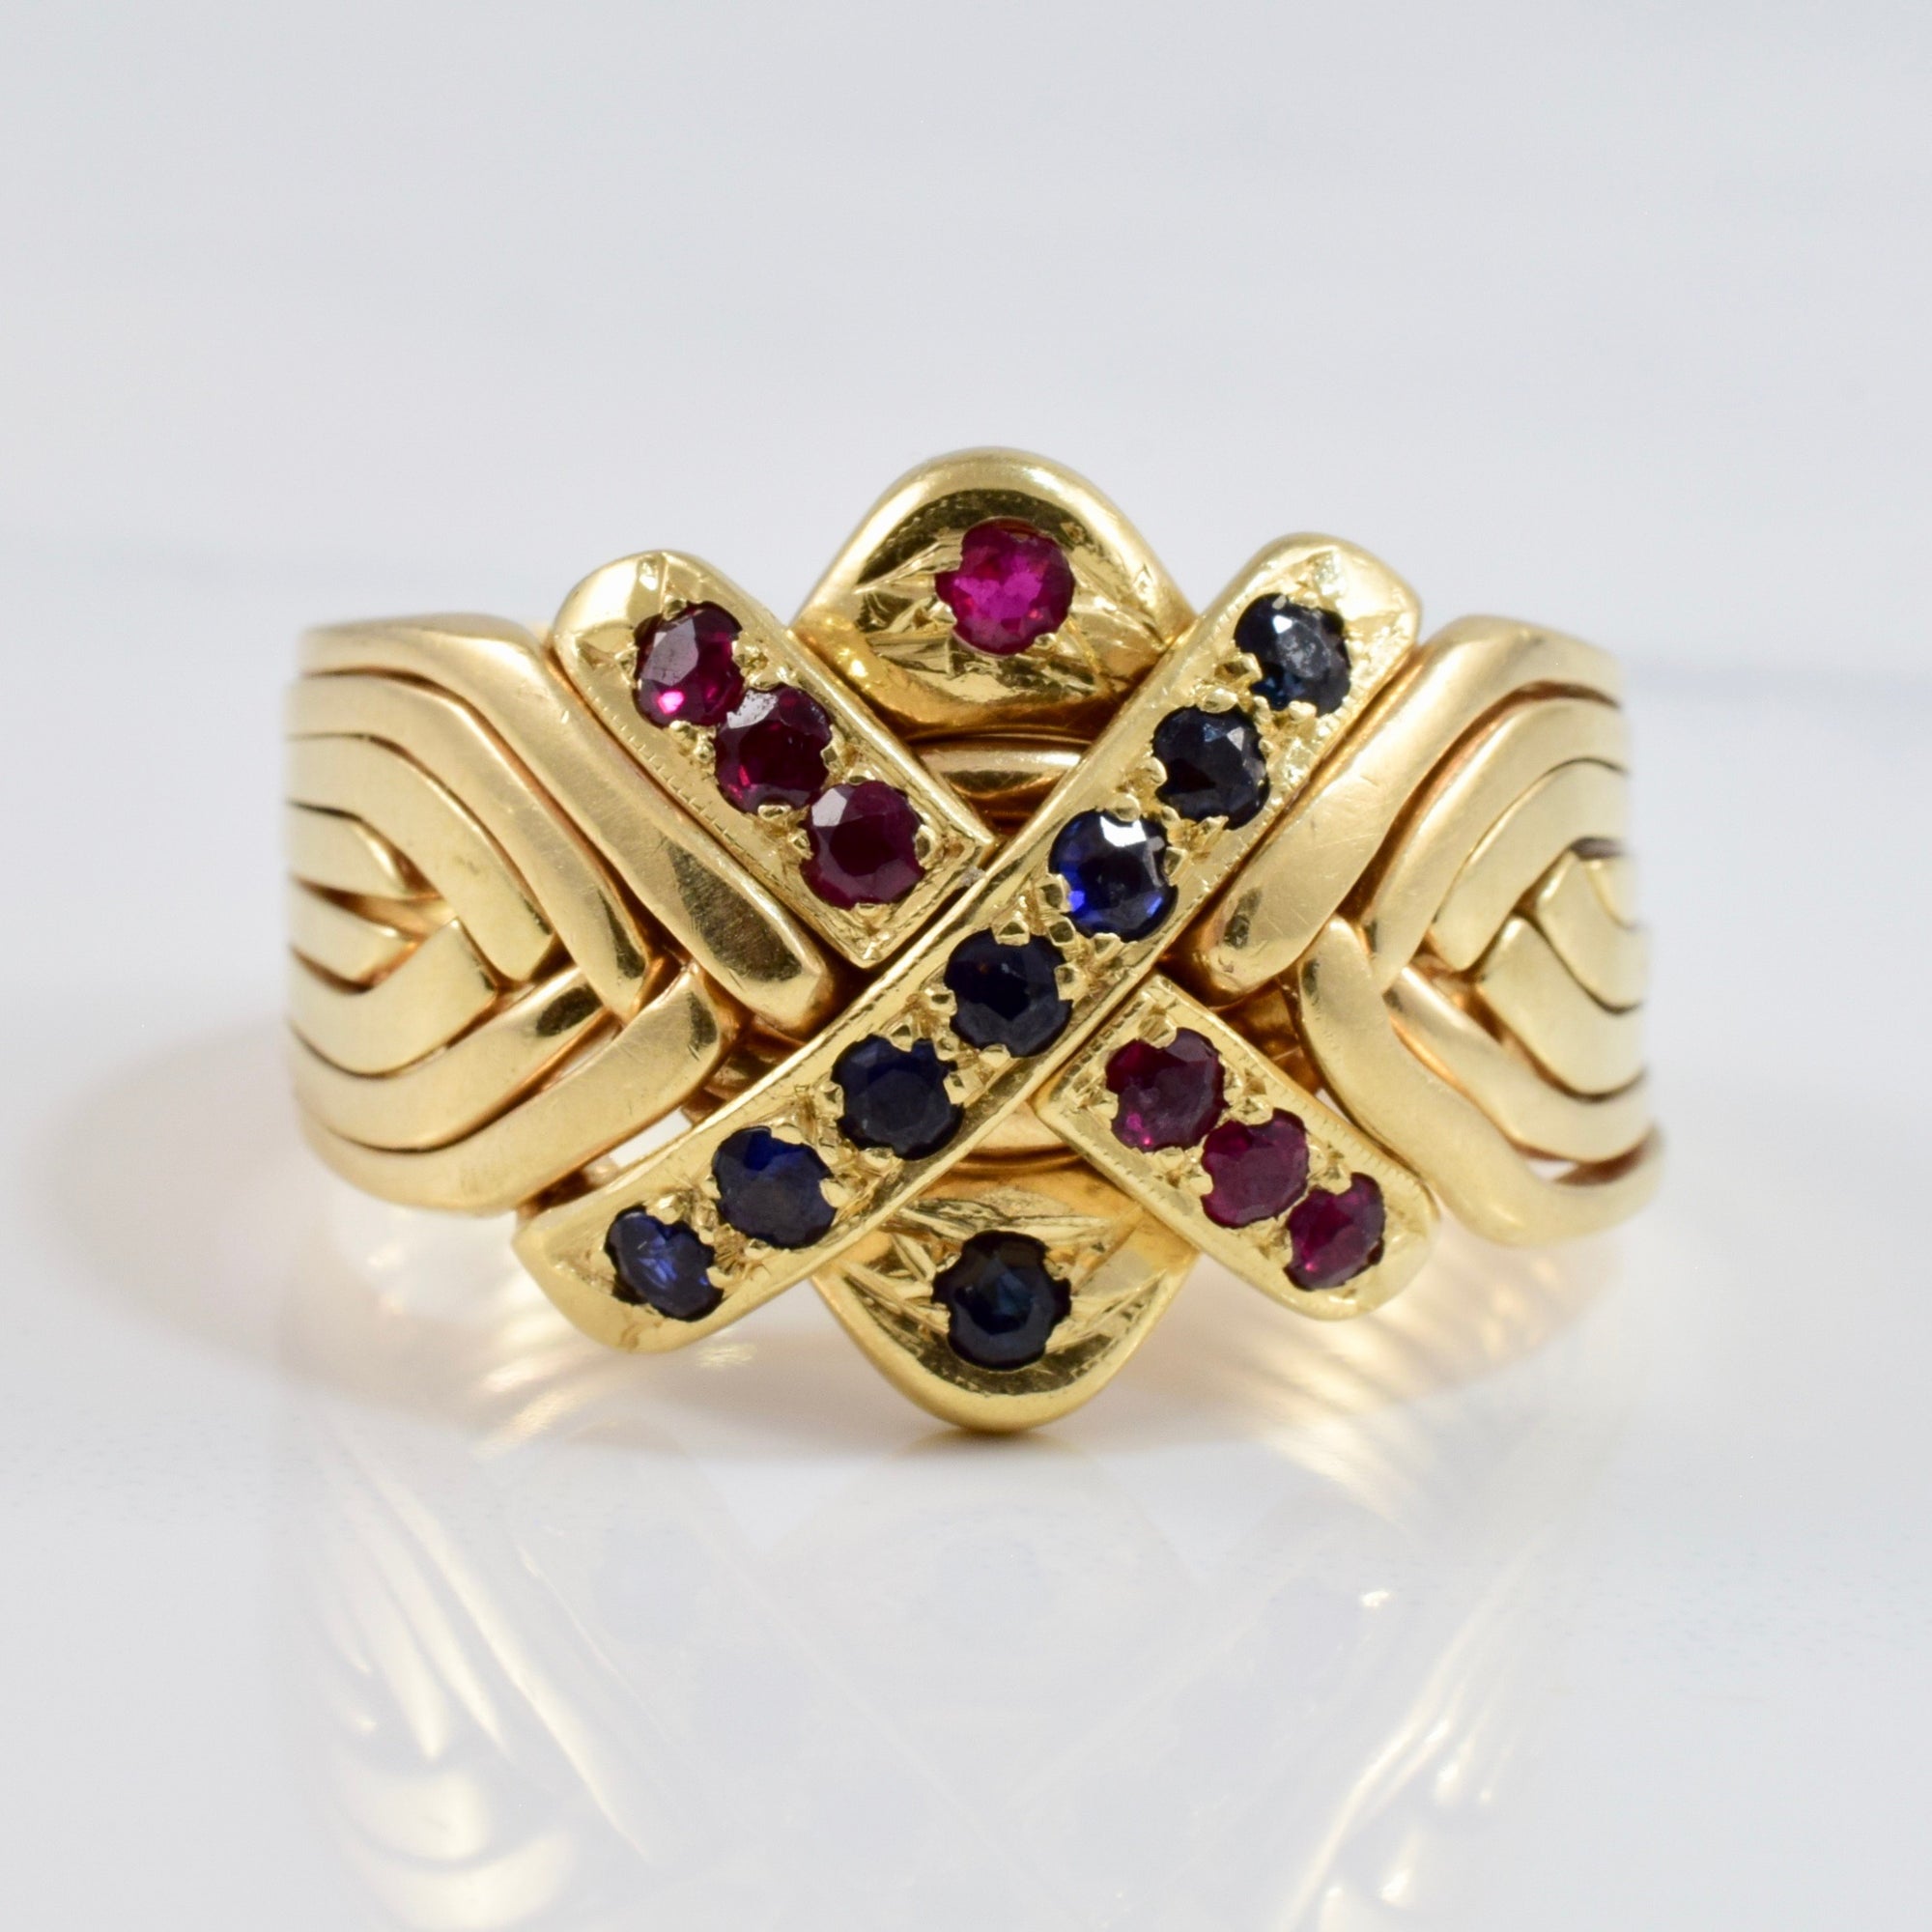 Ruby and Sapphire Puzzle Ring | SZ 10.25 |